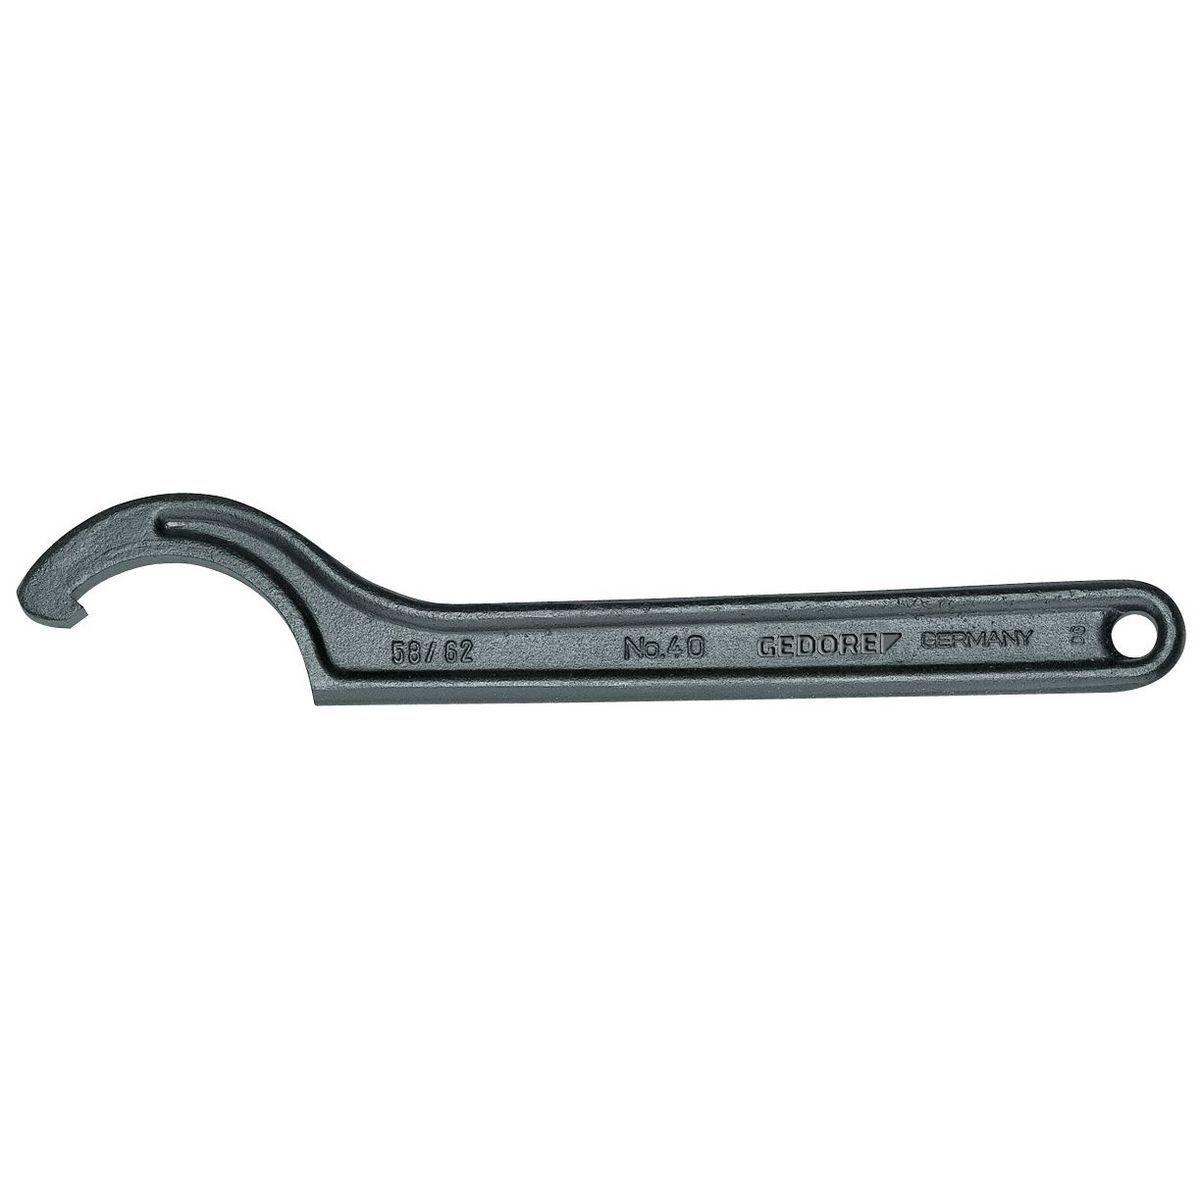 Hook wrench with lug, 120-130mm No.40 120-130 Gedore